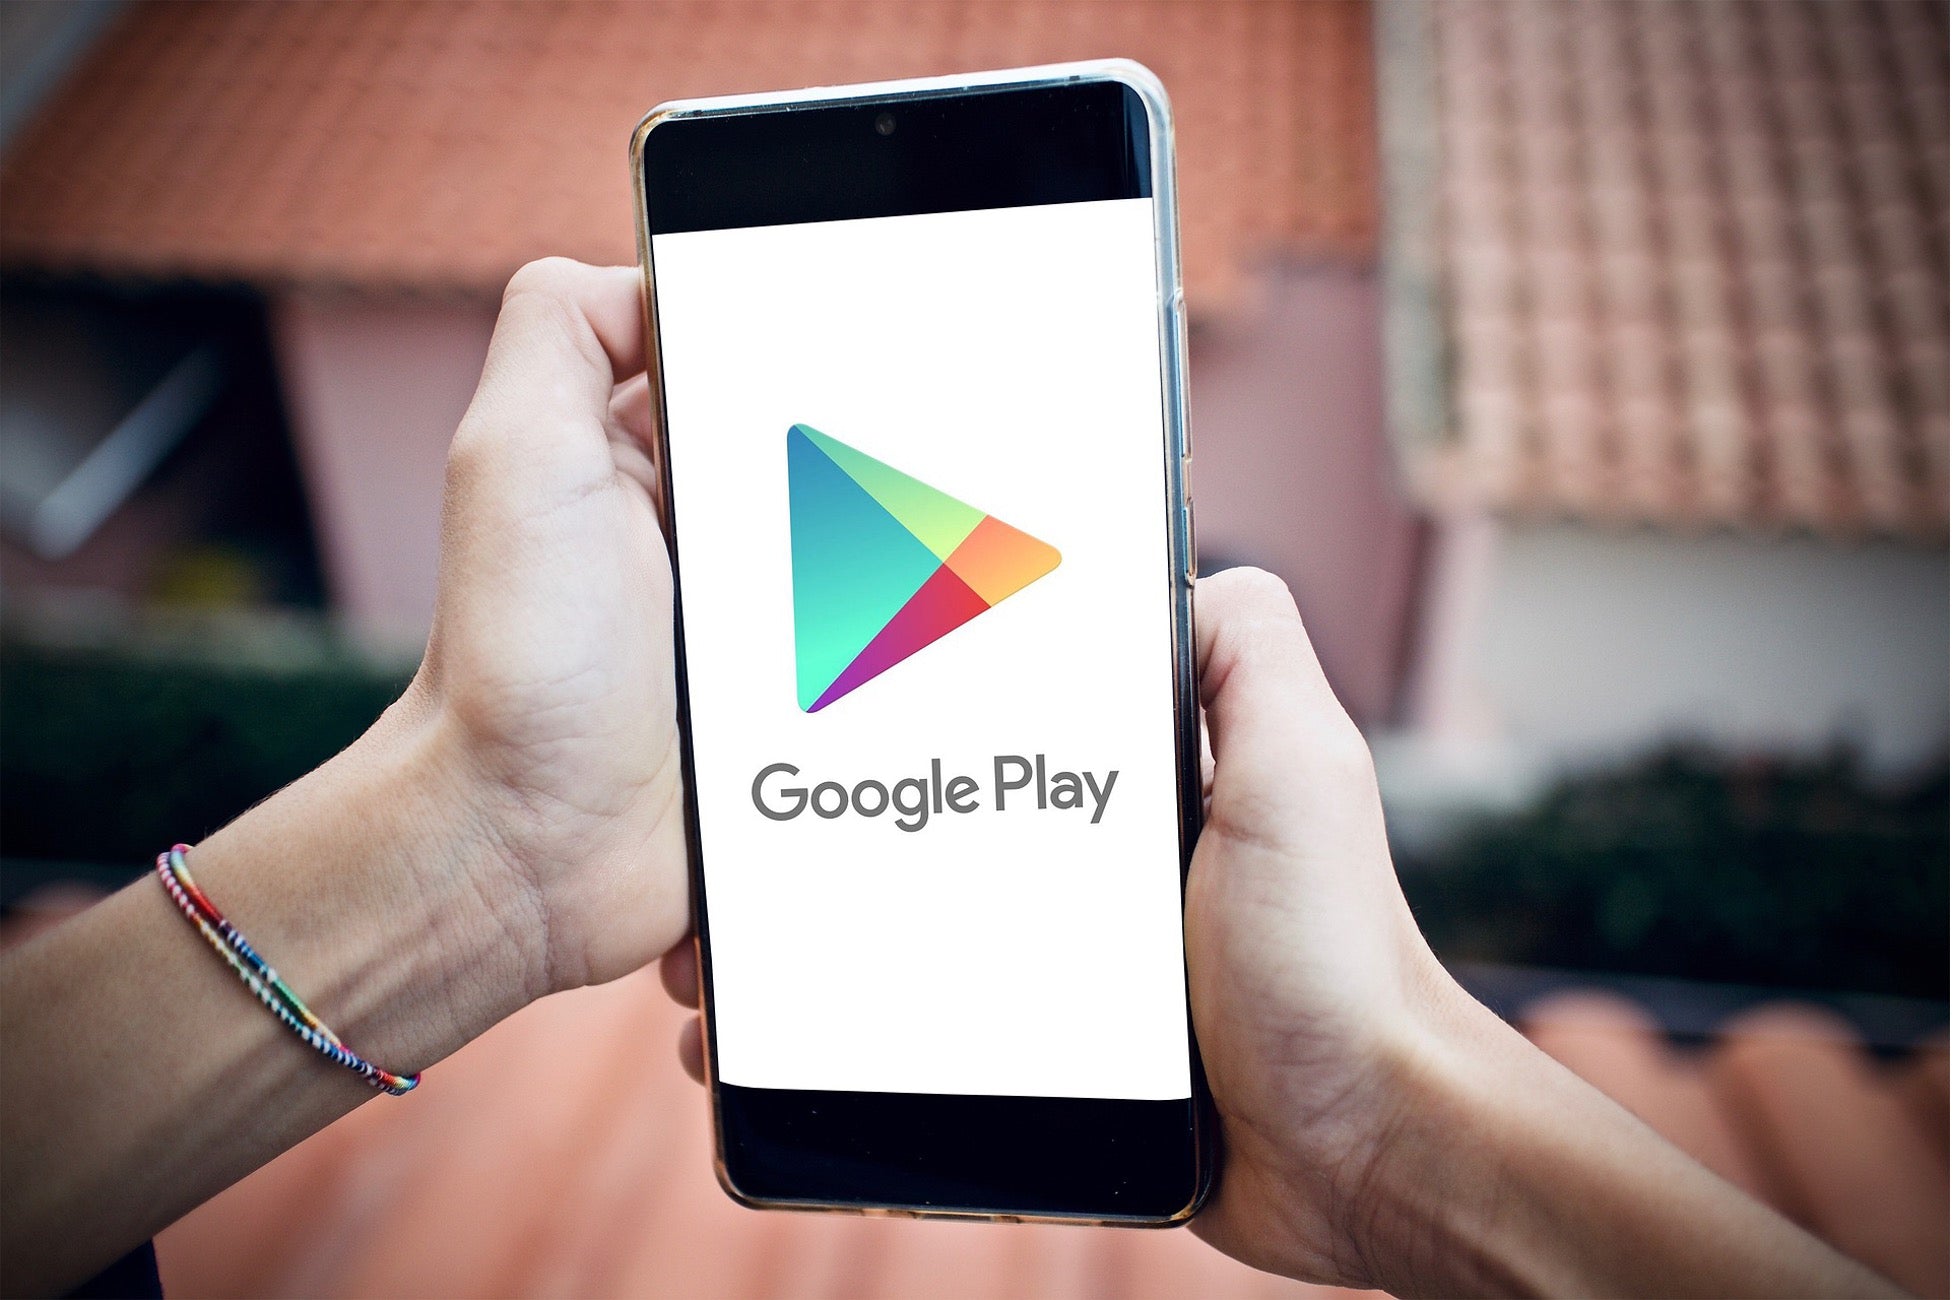 Get free here on X: @Roblox Feel Like Winning a $100 Google Play Gift  Card? Head on over to our web site To Learn How:  .  #googleplaycard #googleplaygiftcard #freegoogleplay #googleplaycards # googleplay #